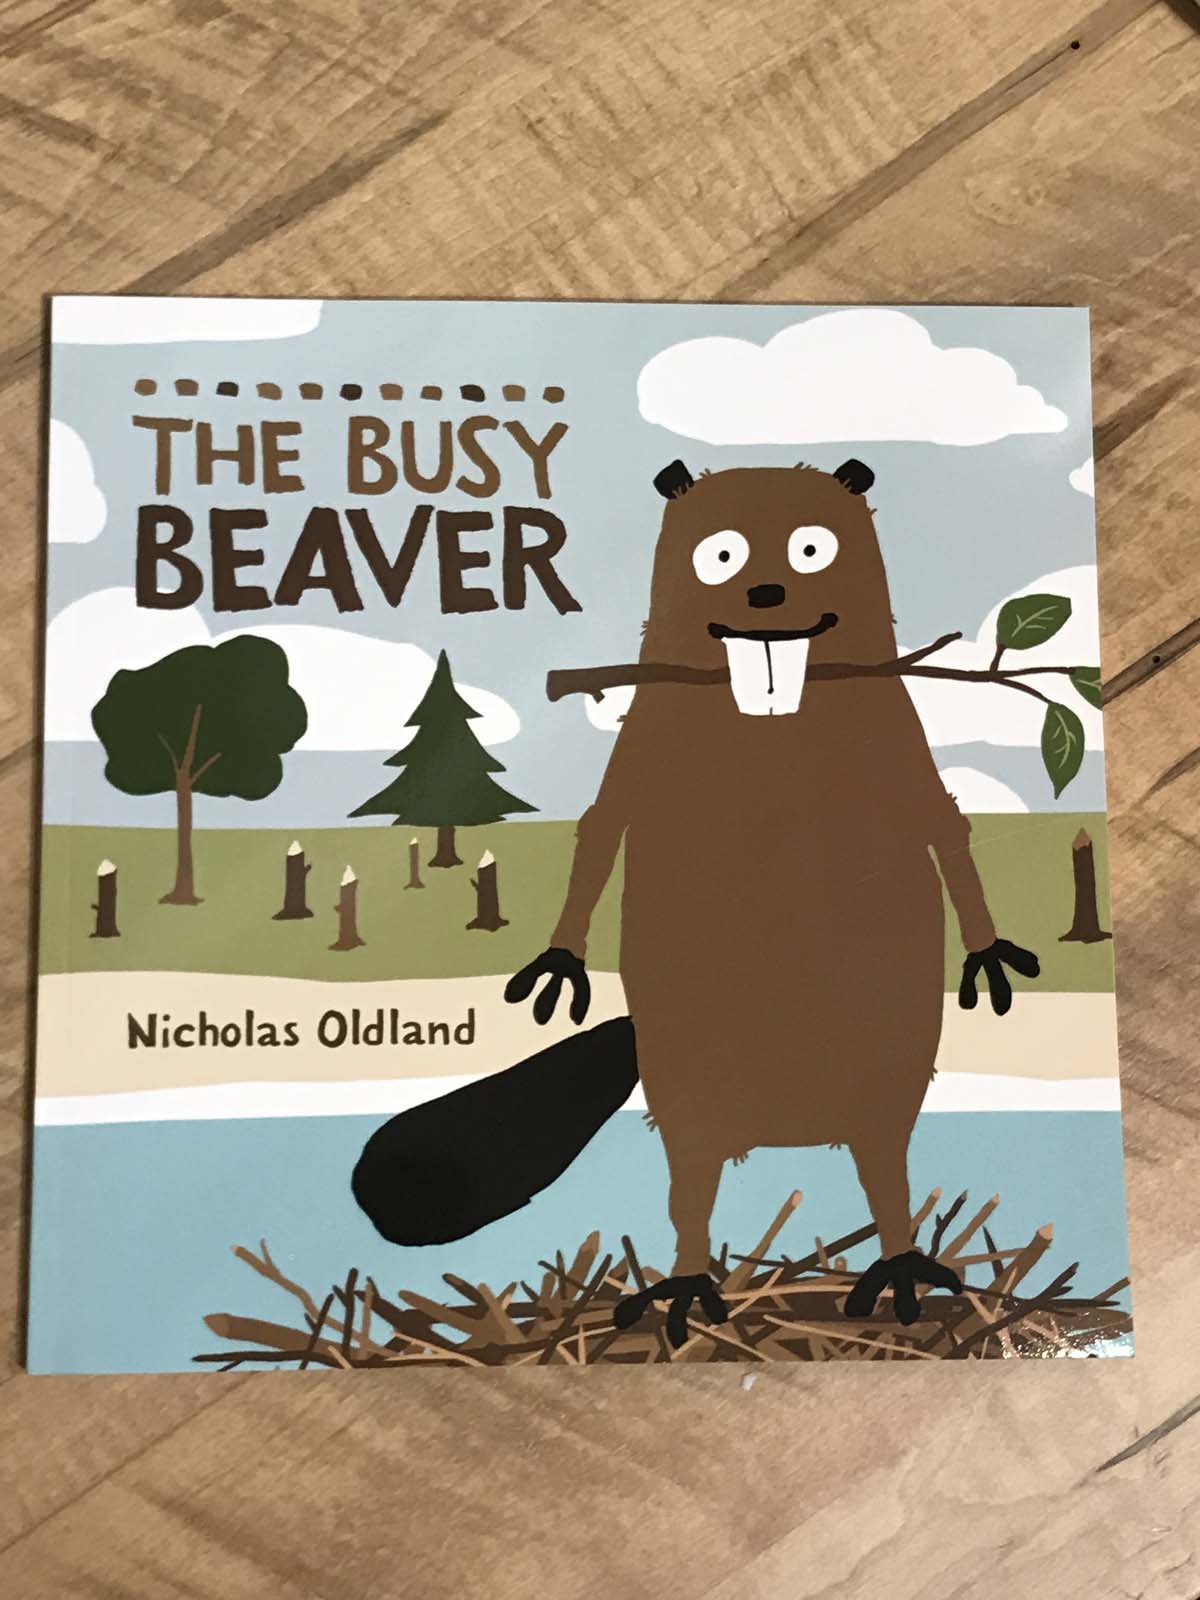 THE BUSY BEAVER